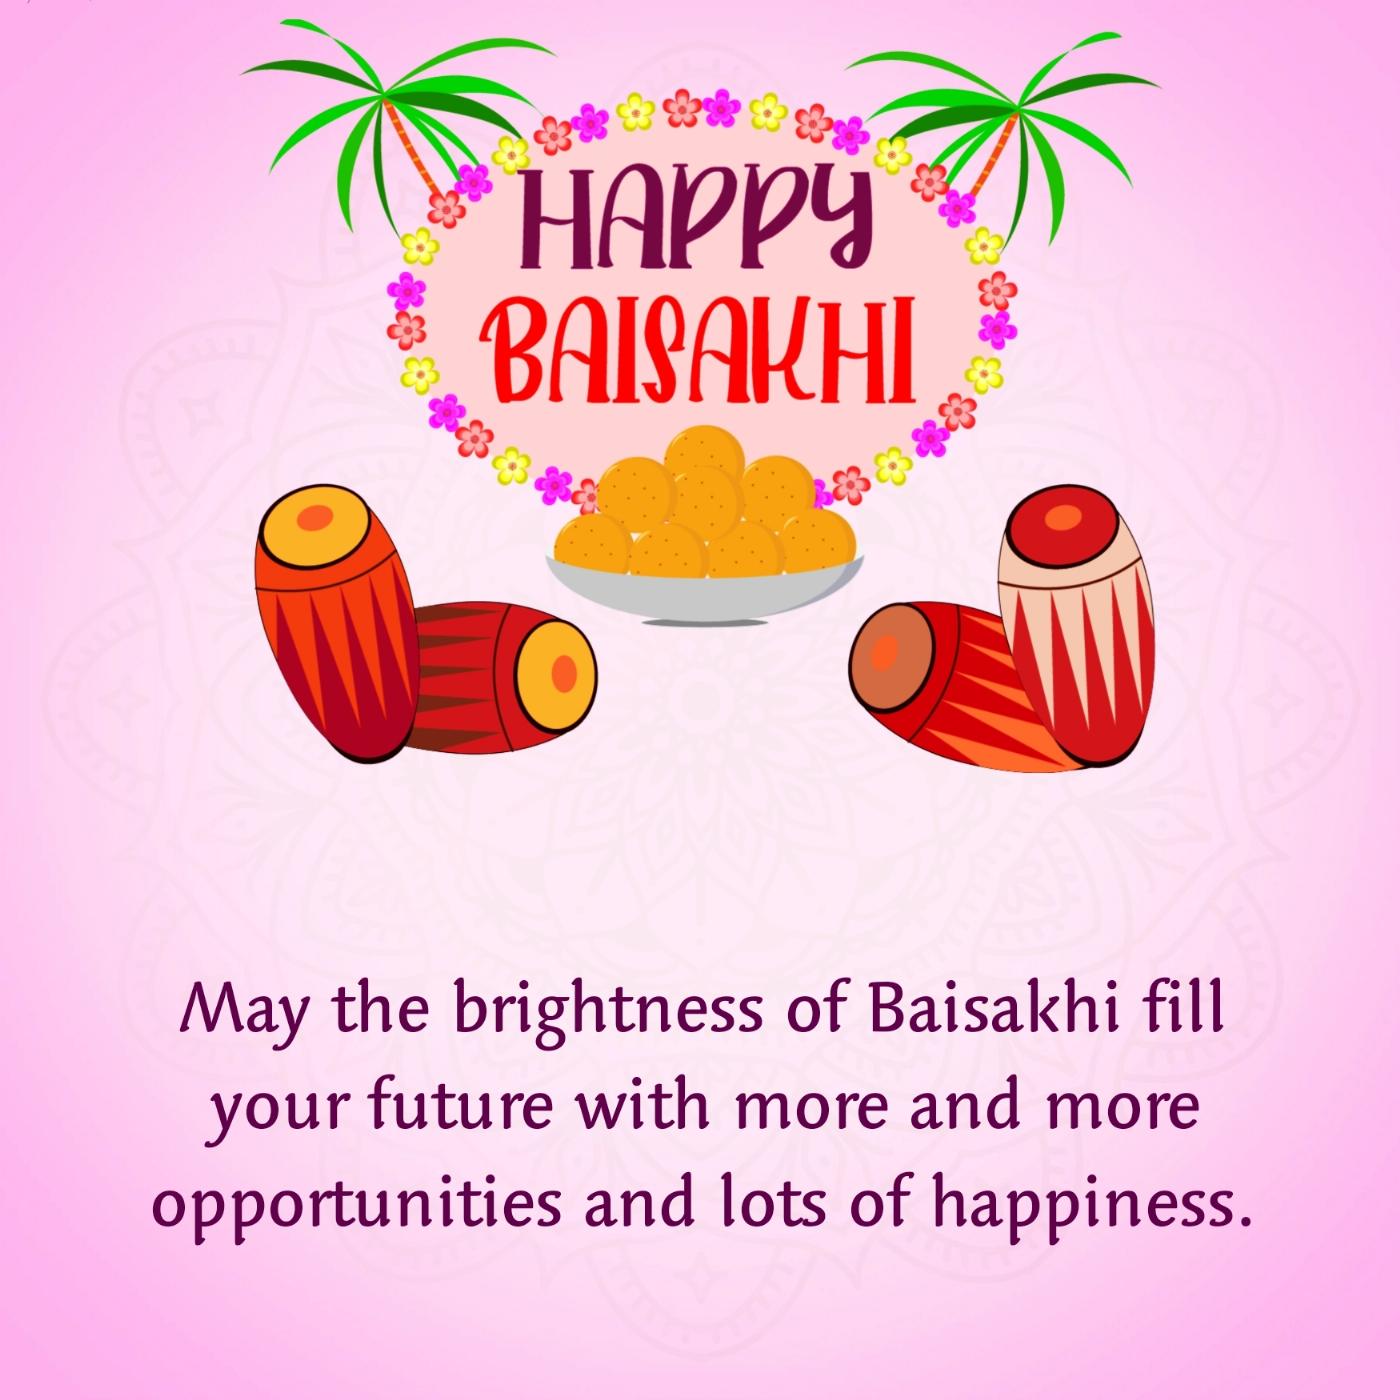 May the brightness of Baisakhi fill your future